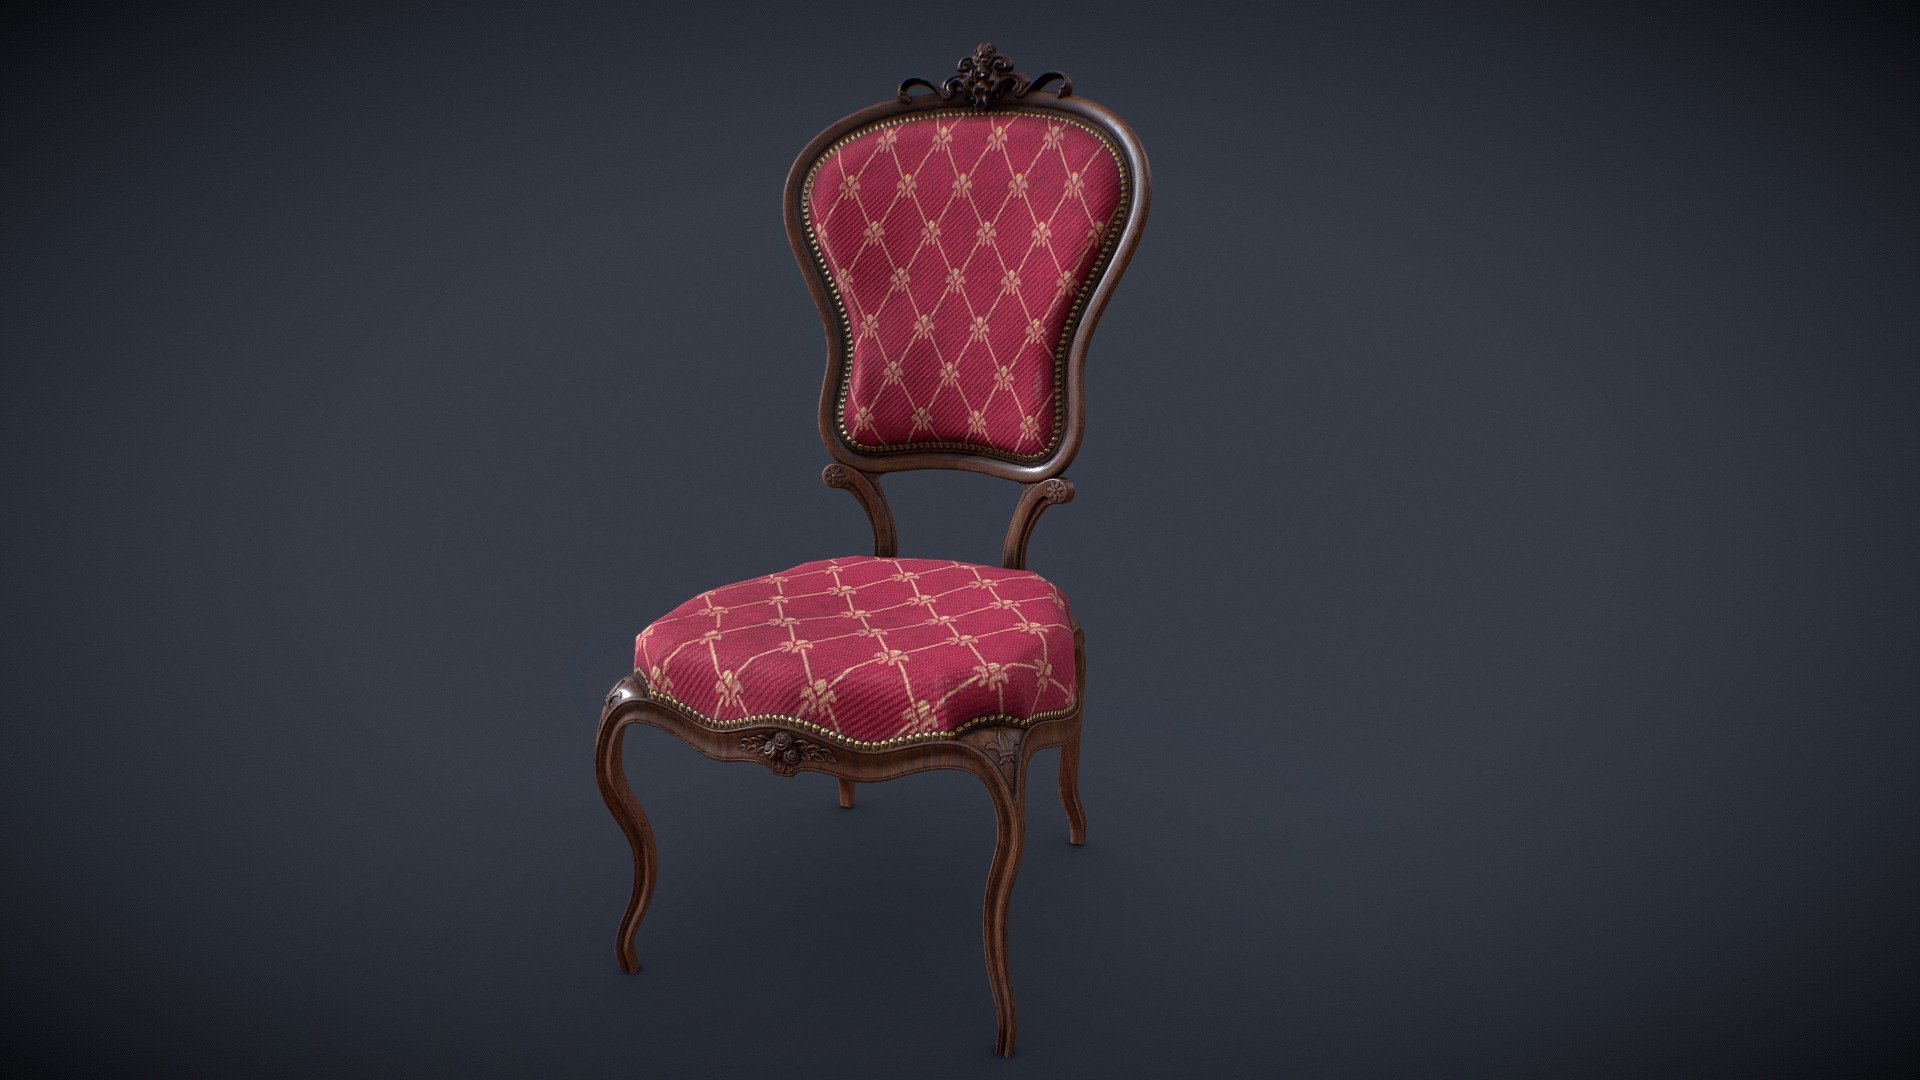 Hello folks ! This is a new props for a victorian project, a chair that ay fit well in front of a large wooden desk :)

Made with Maya, PS and Substance.

You will find in the package Scene file, FBX and 2k Textures.
If you have any customs need, please feel free to contact me 3d model